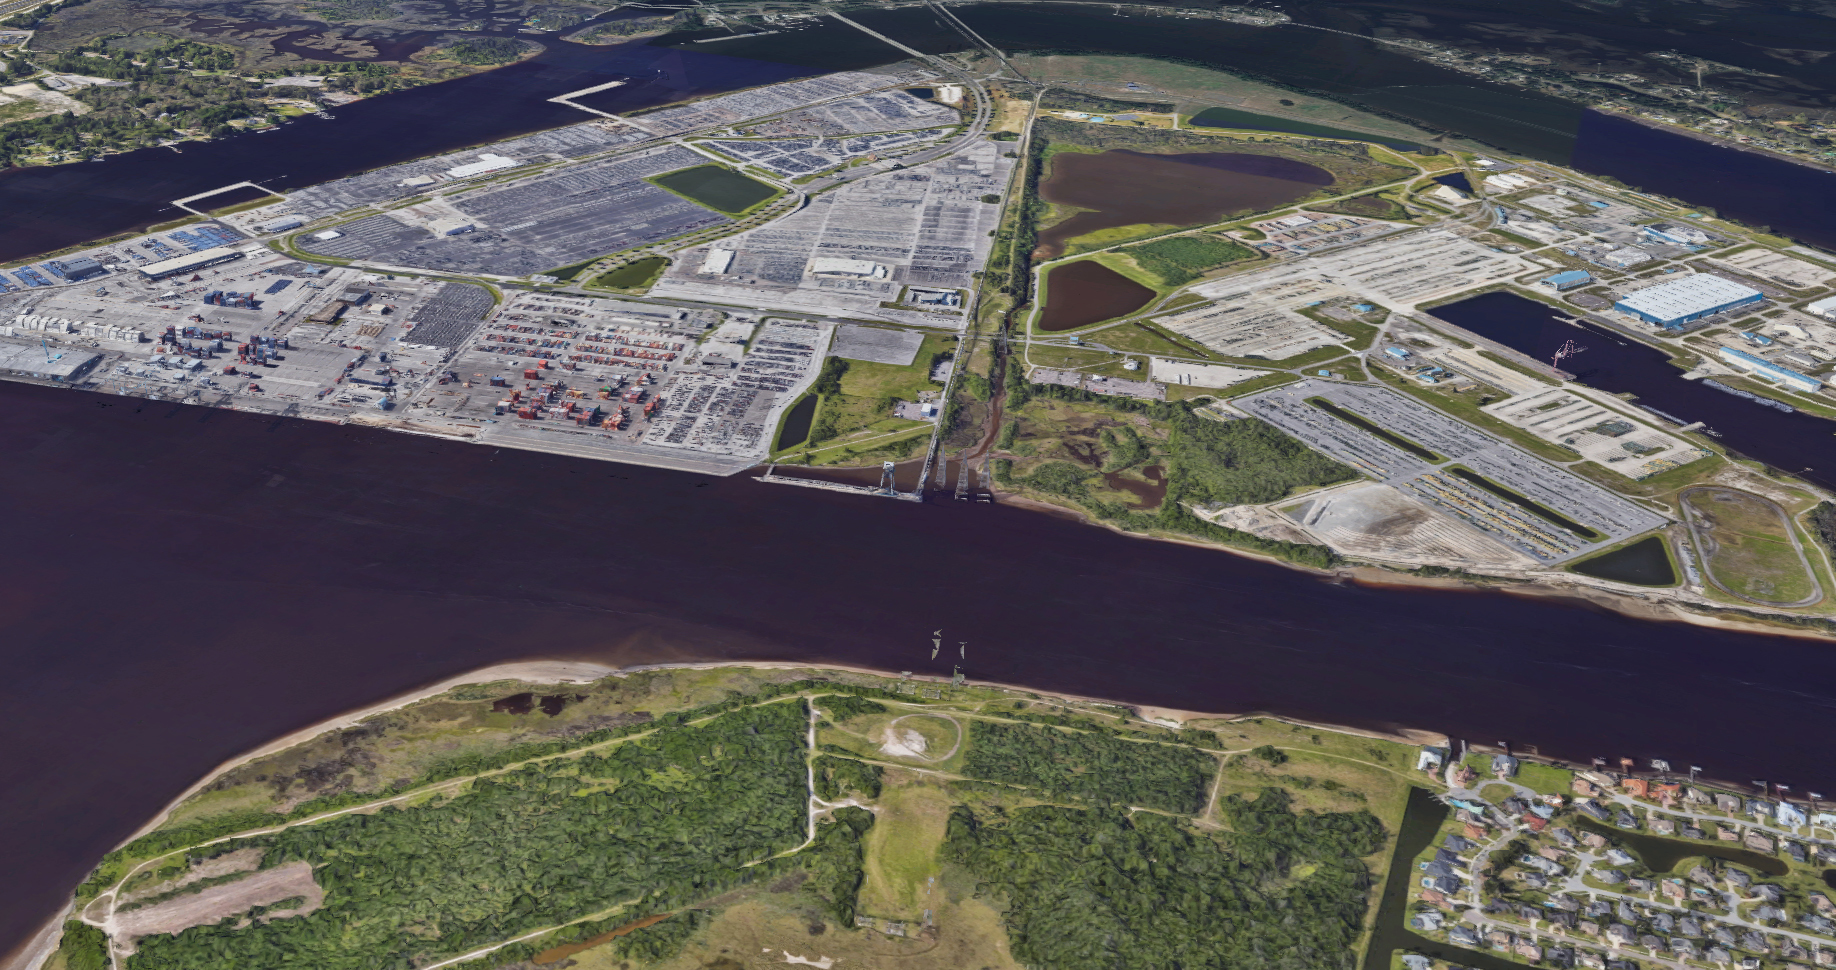 Taxpayers spent  $420 million to deepen the St. Johns River so larger ships can use the channel, but they need more space to pass the power lines.